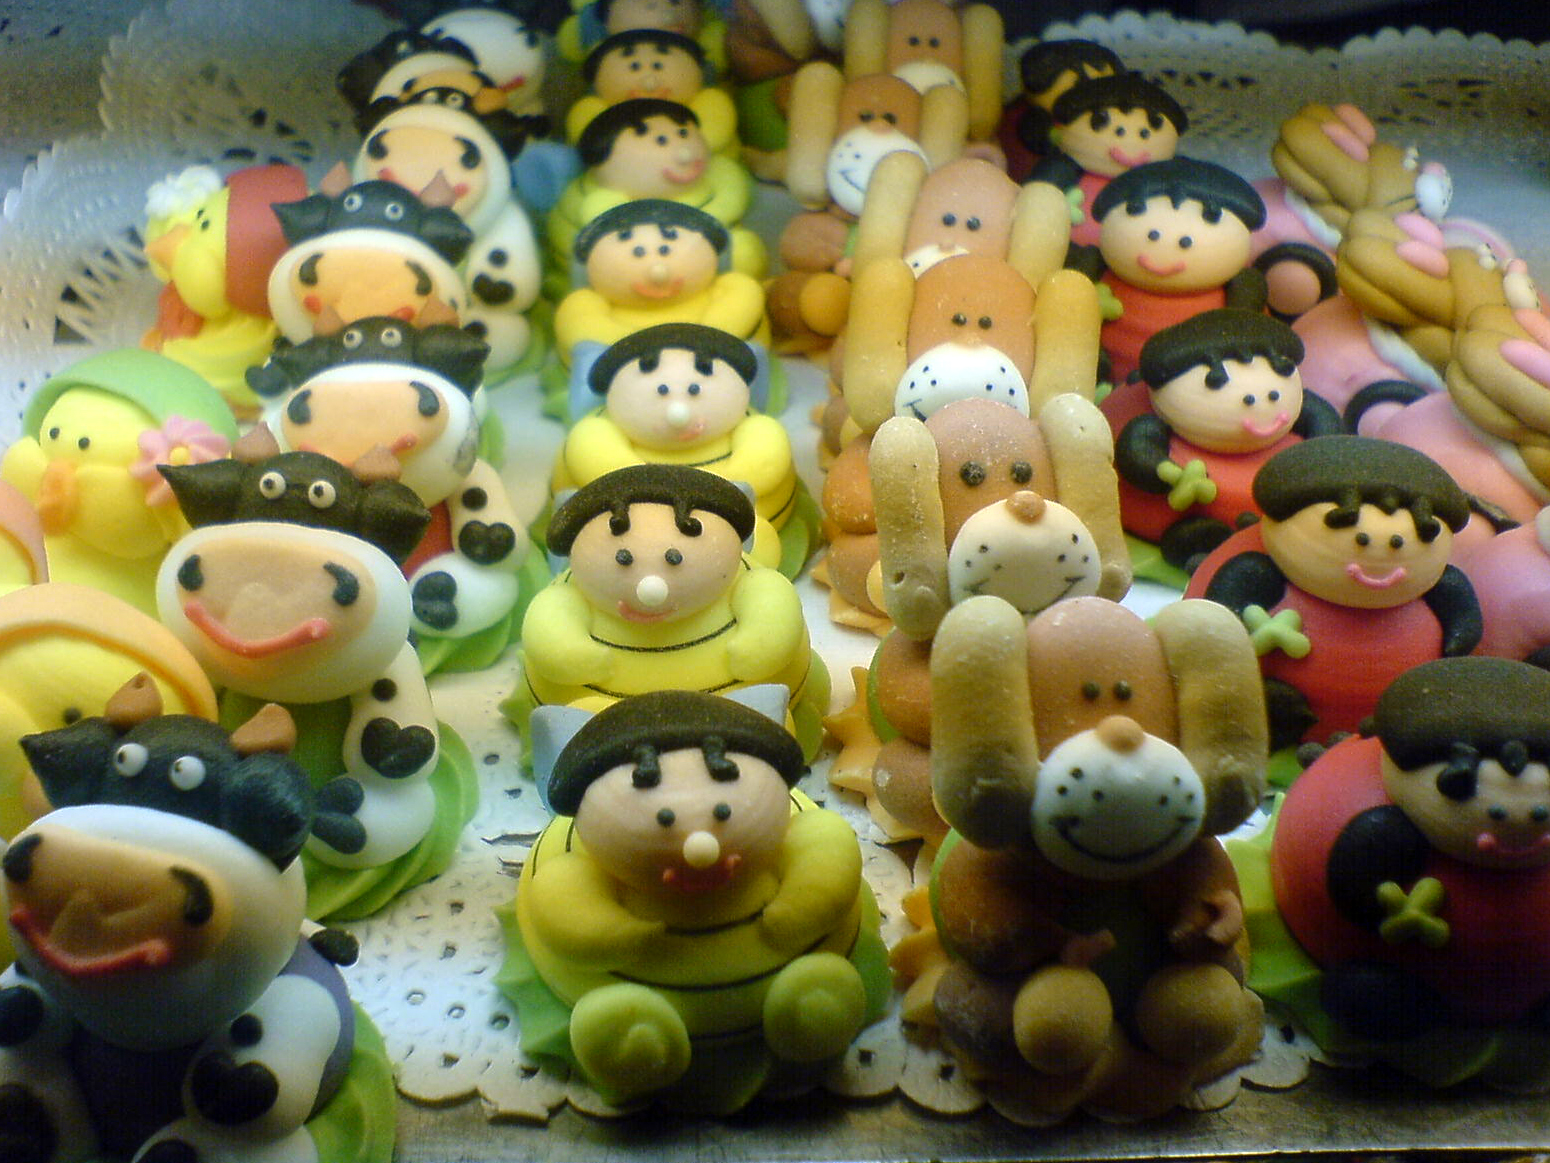 Description Marzipan Figures At A Pastry Shop May 2007jpg